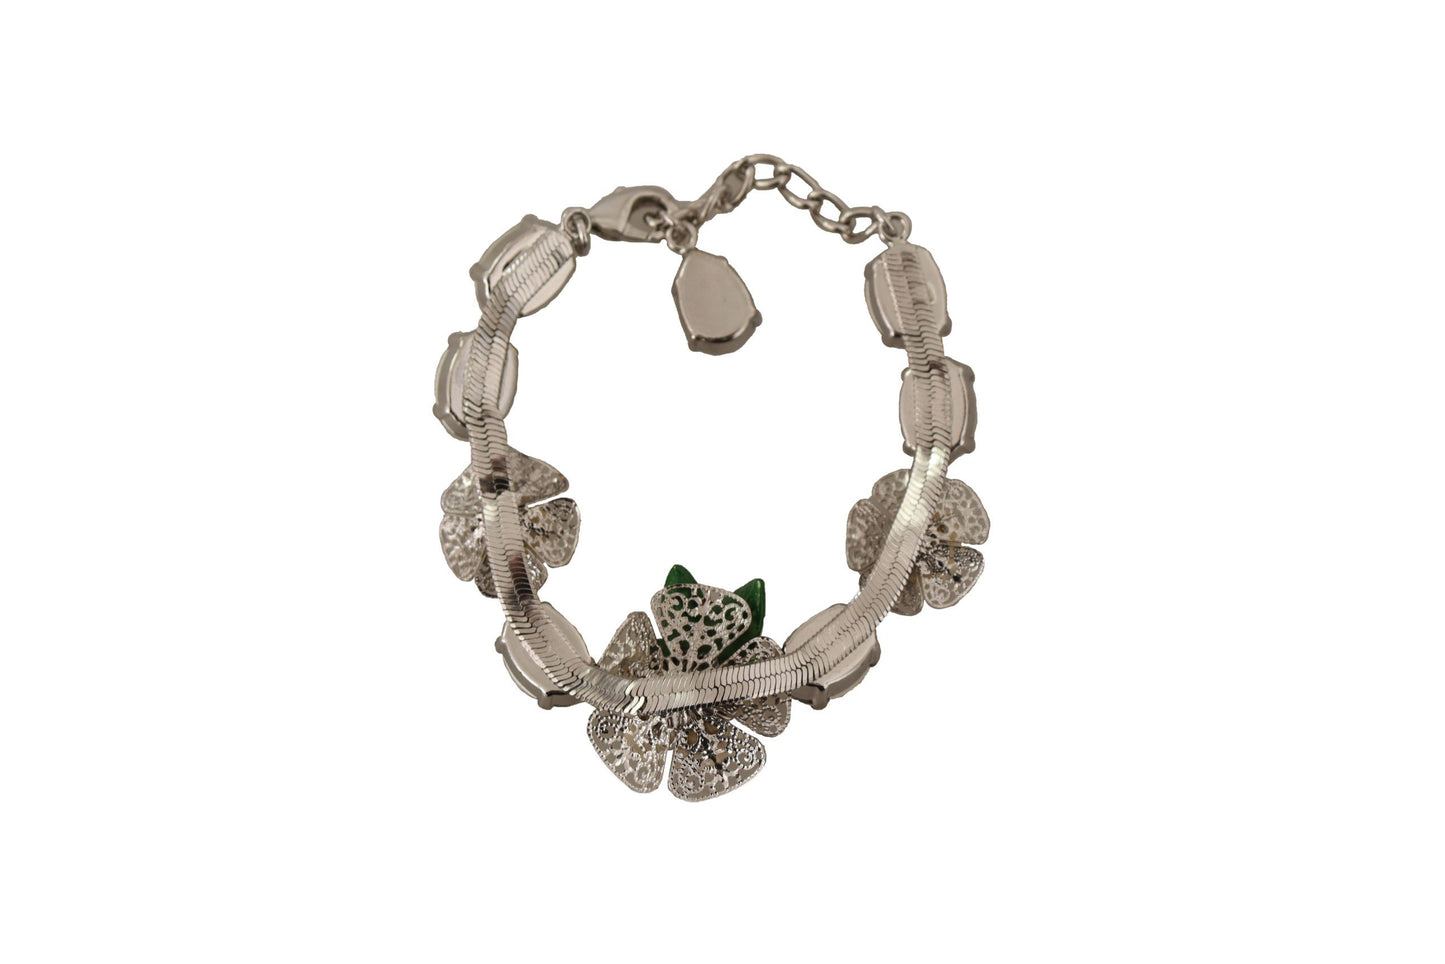 Dolce & Gabbana Elegant Silver Chain Bracelet with Charms & Crystals